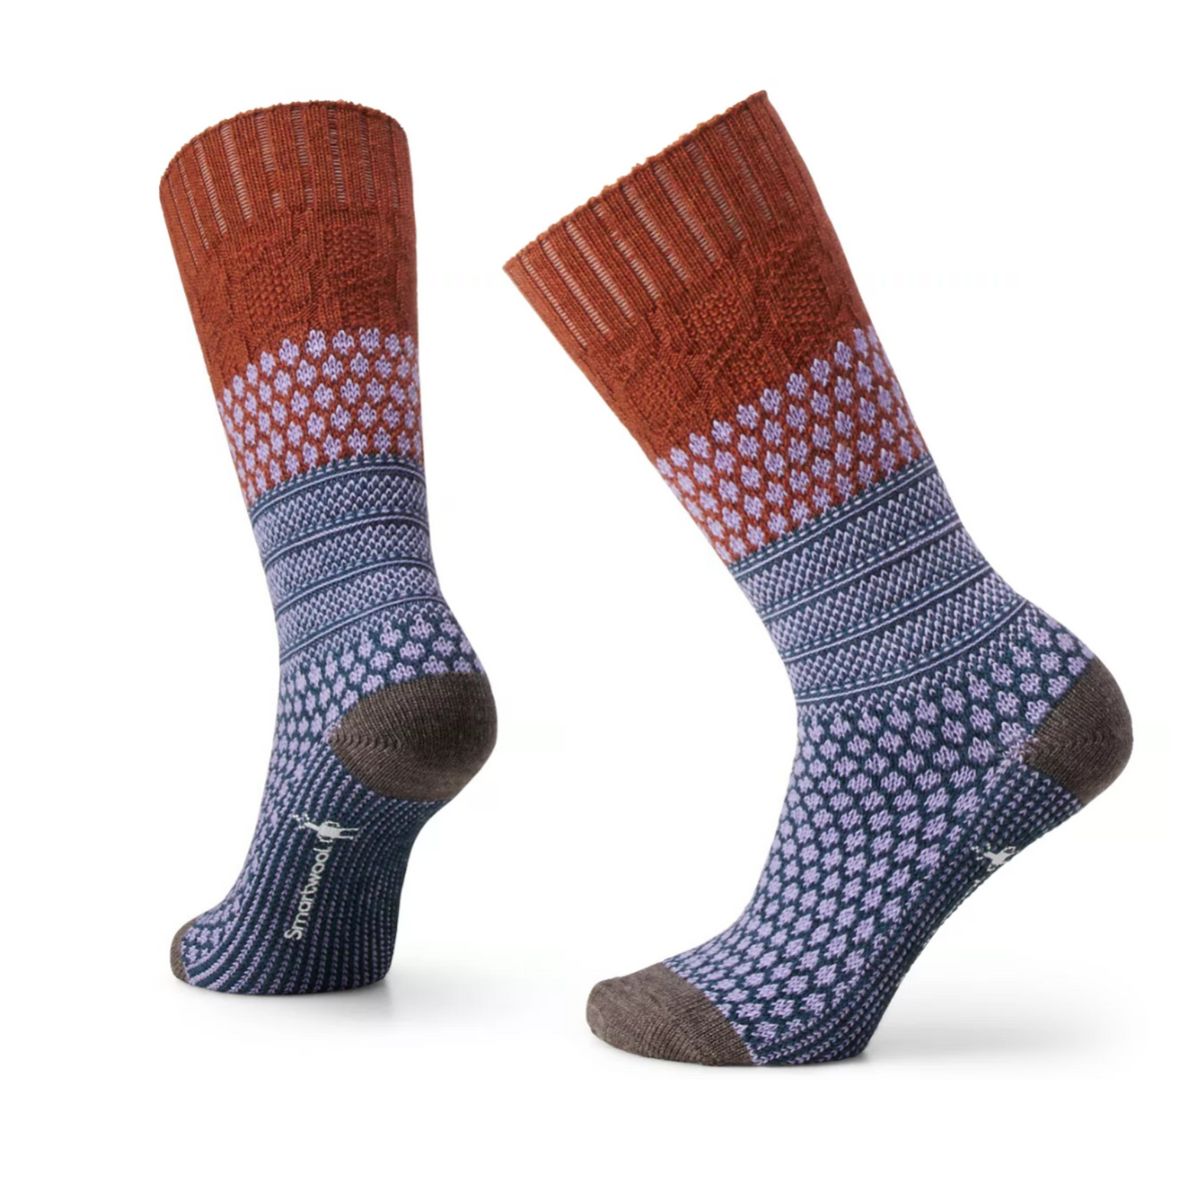 Smartwool Popcorn Cable Crew women&#39;s sock featuring rust colored cuff, and blue and lavender pattern on rest of sock. Socks on display feet. 